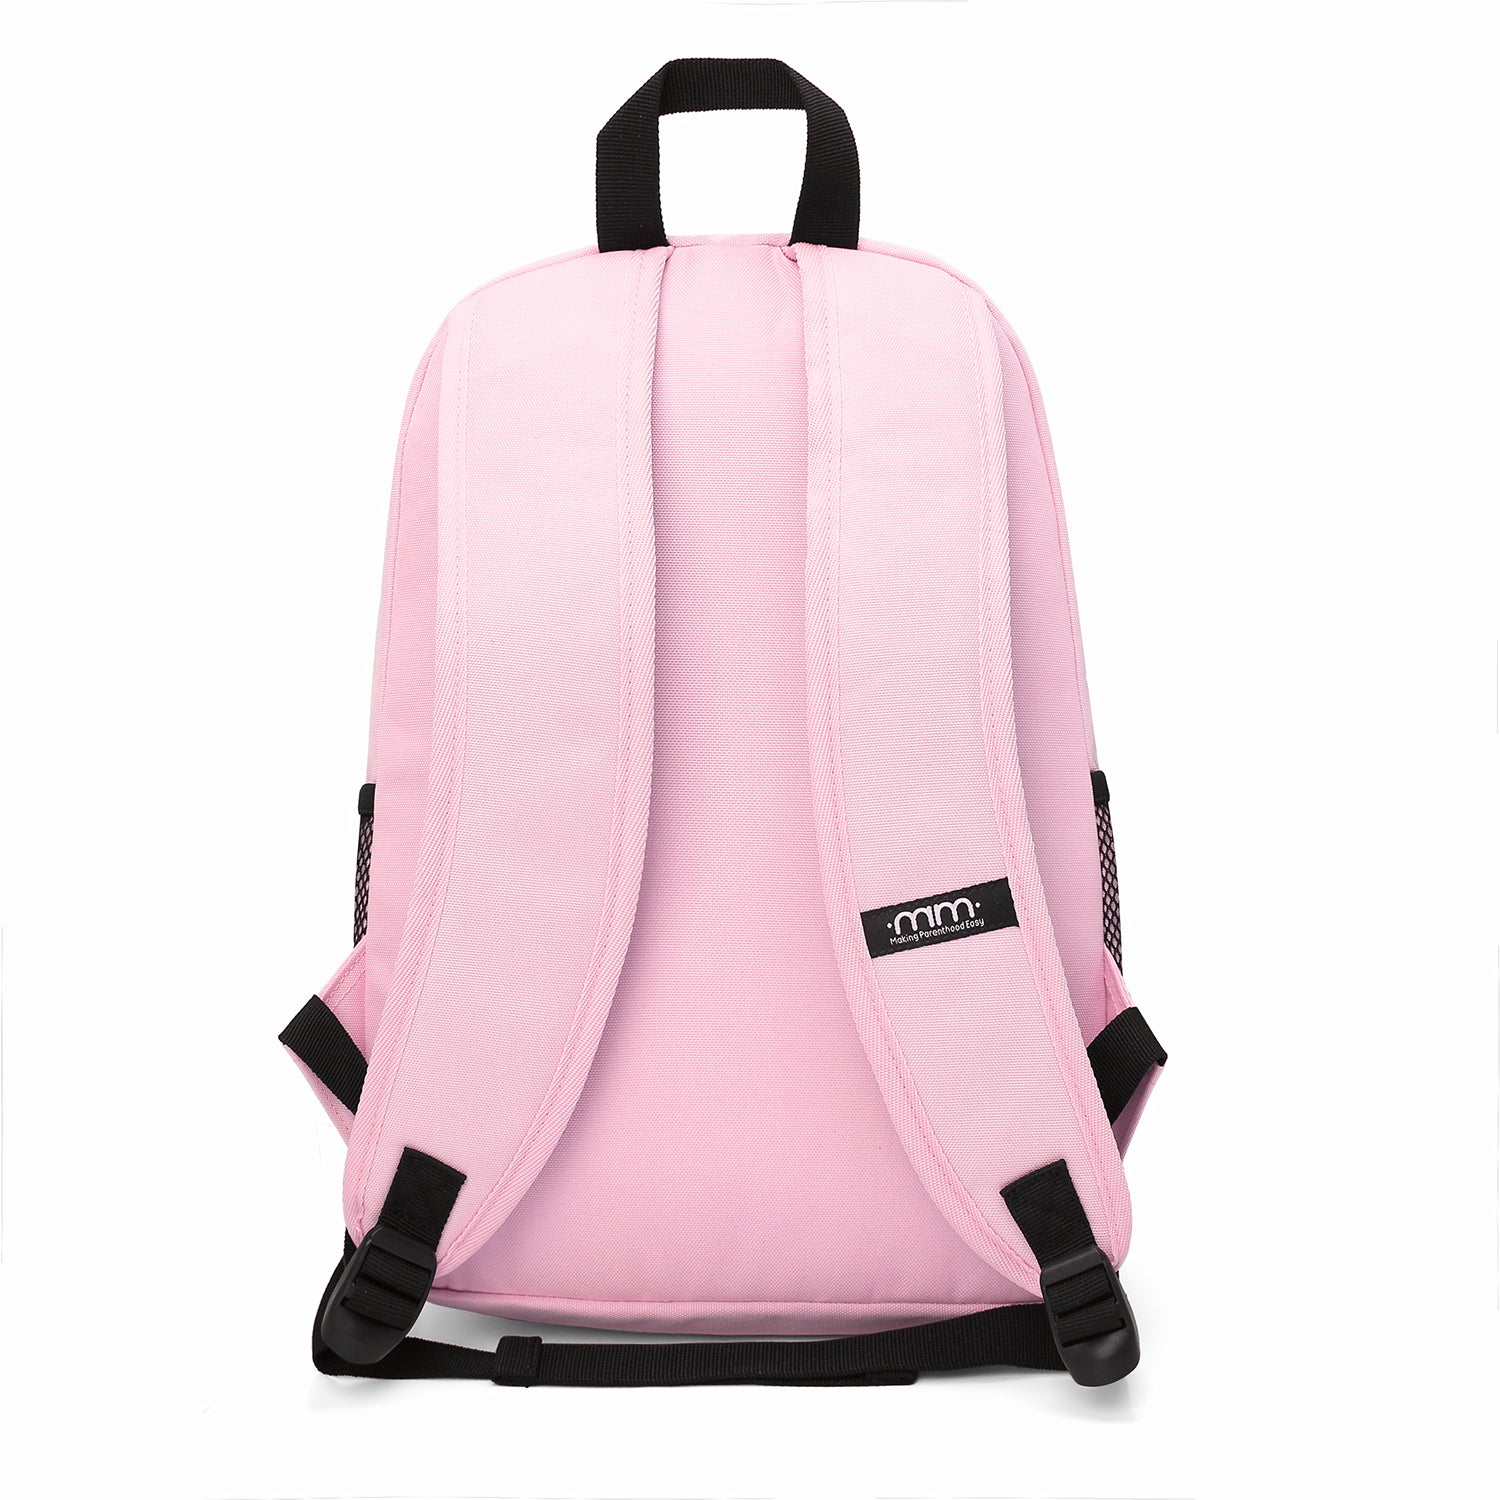 Crushing on this large GM backpack! Perfect for a mama on the go traveling  the world or a back to school bag. …